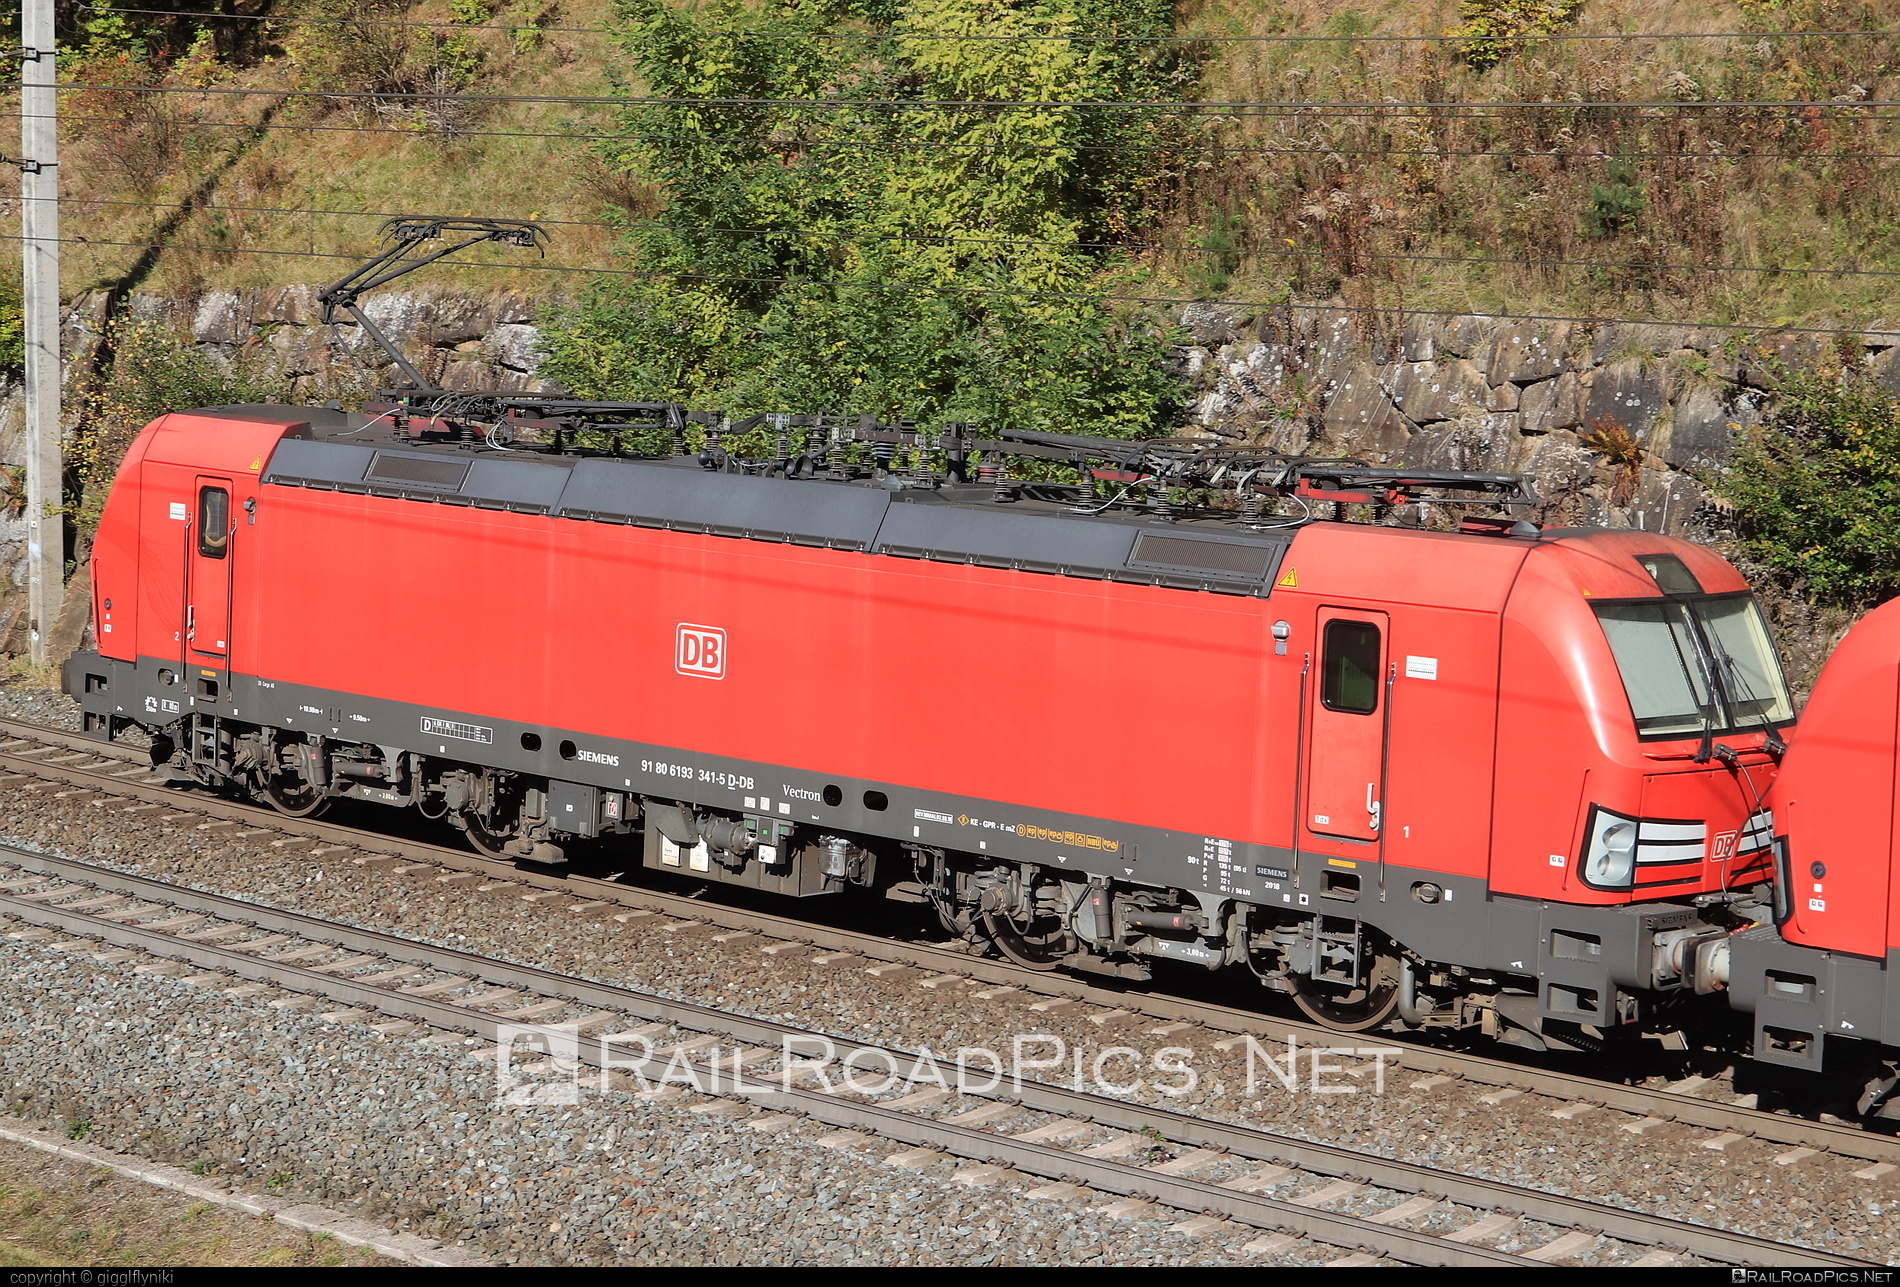 Siemens Vectron MS - 193 341 operated by DB Cargo AG #db #dbcargo #dbcargoag #deutschebahn #siemens #siemensVectron #siemensVectronMS #vectron #vectronMS